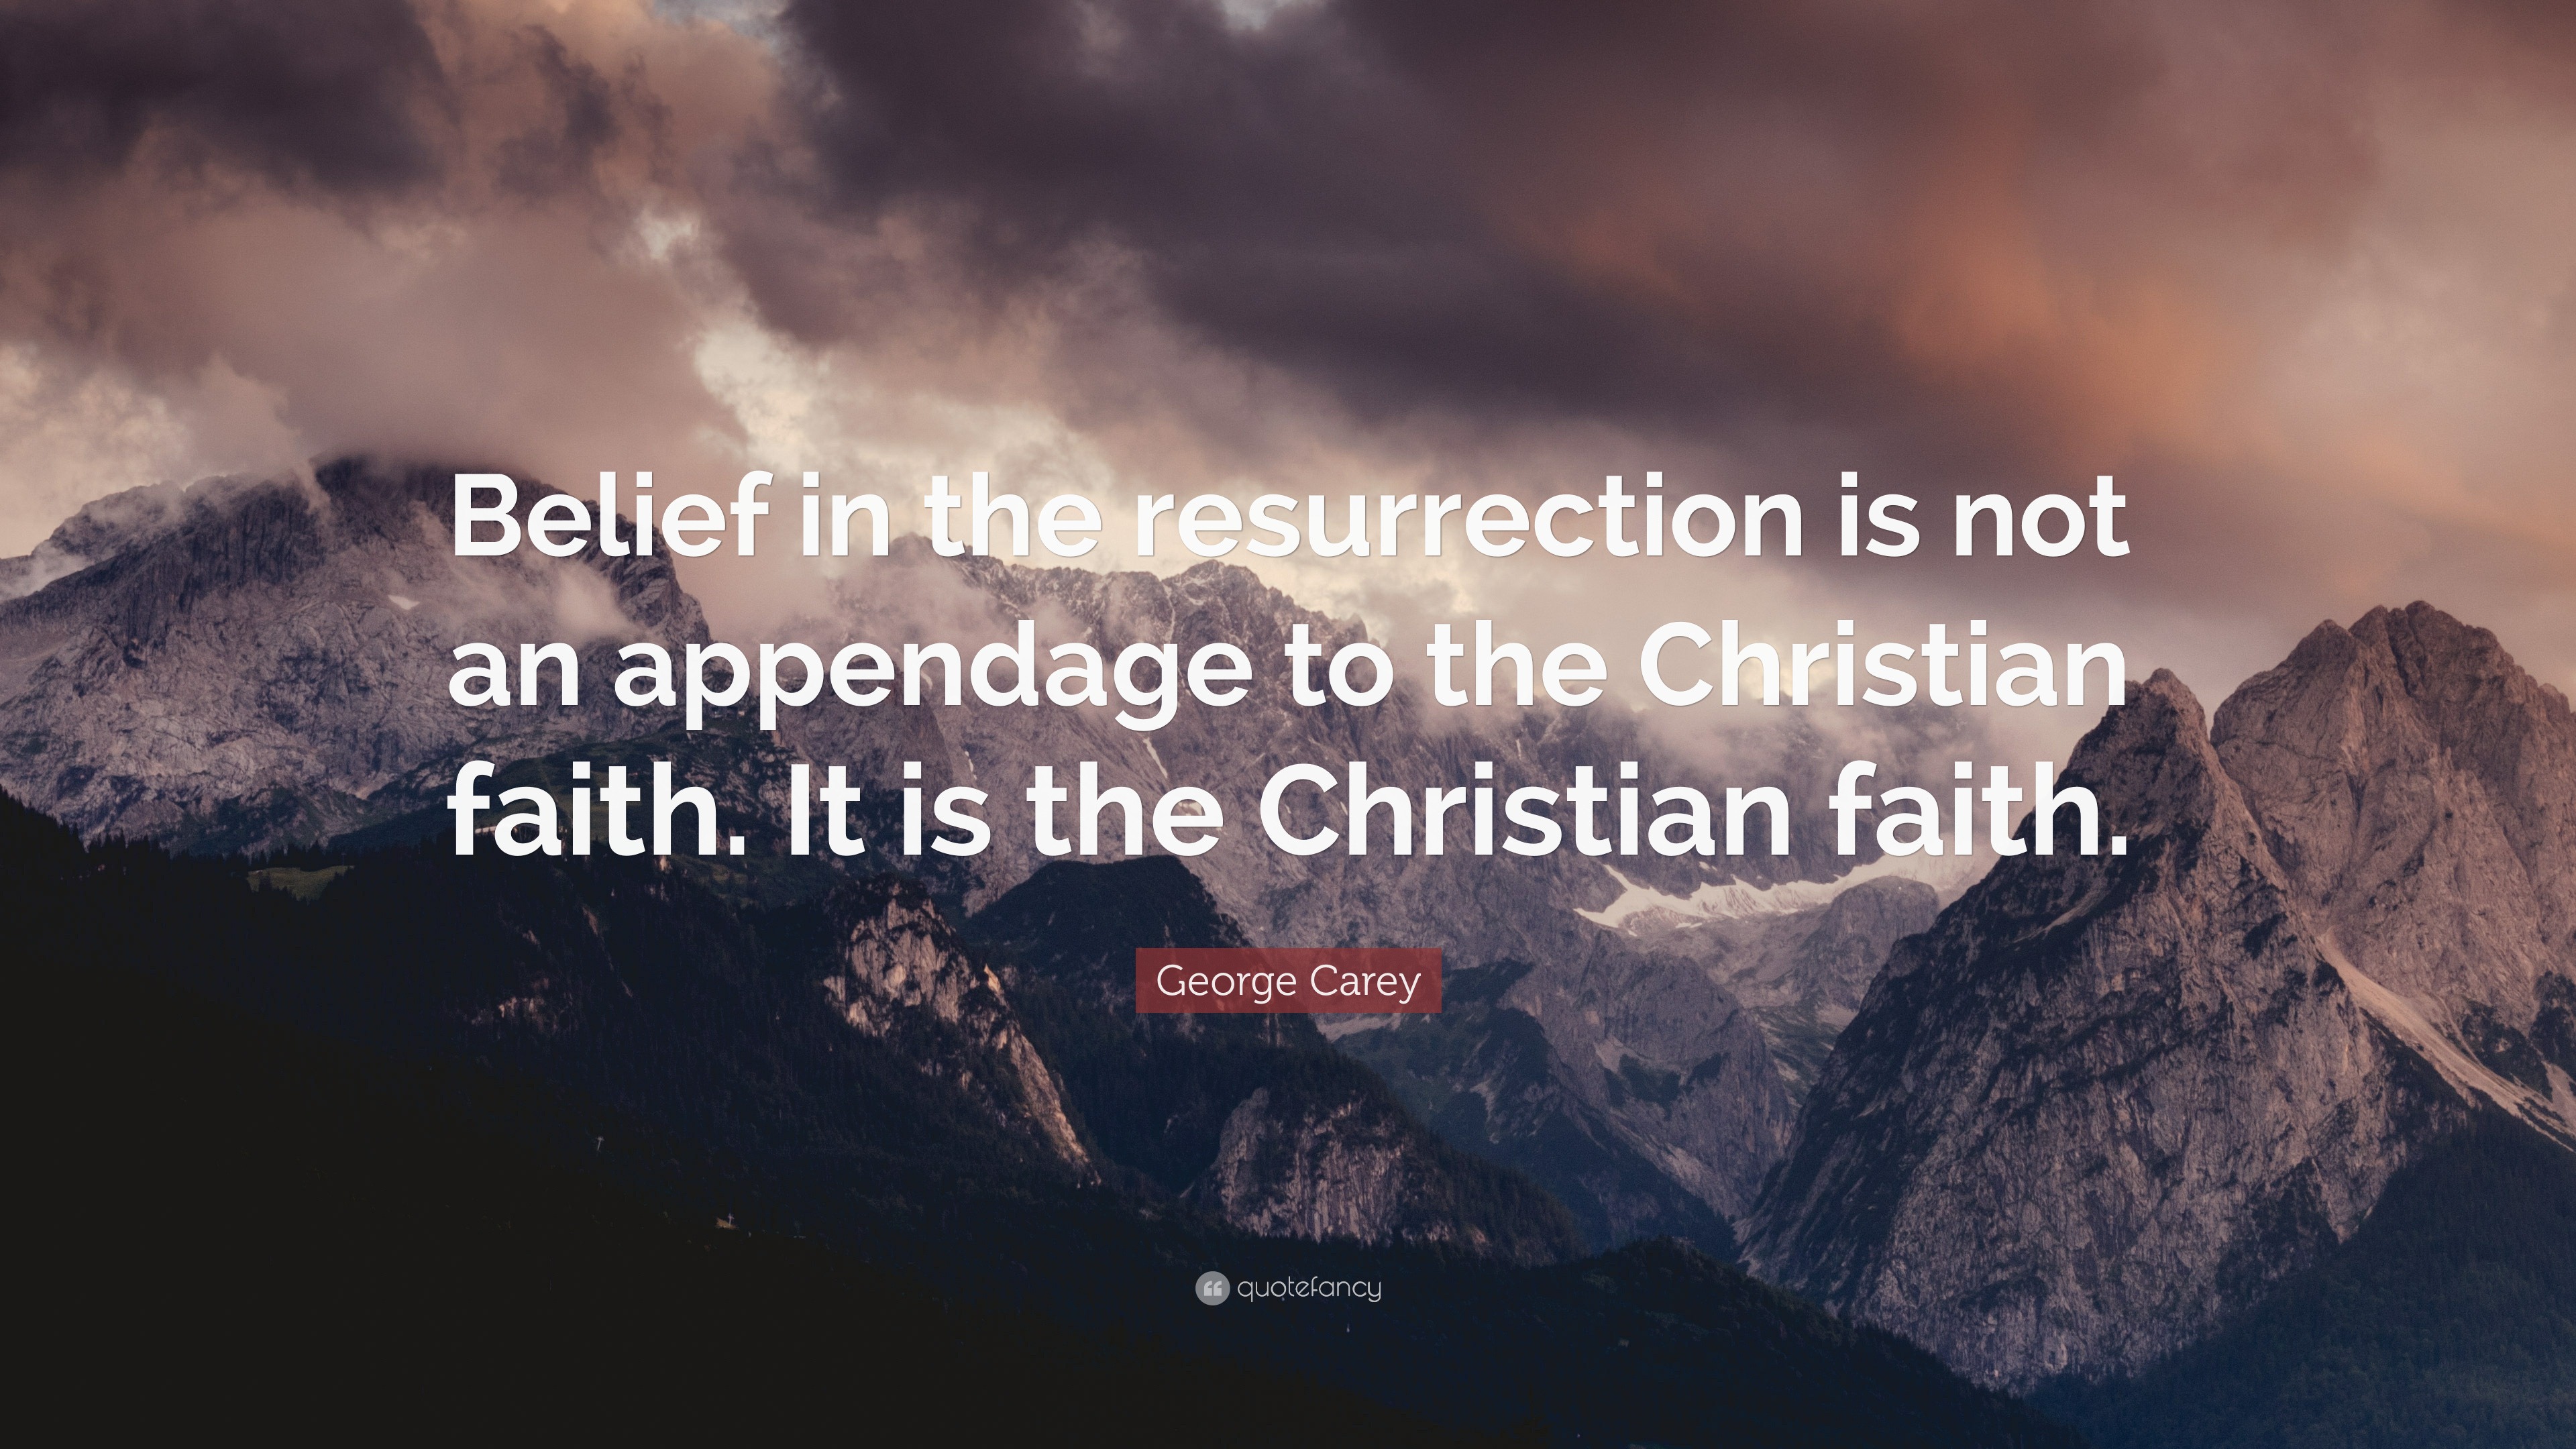 George Carey Quote: “Belief in the resurrection is not an appendage to ...